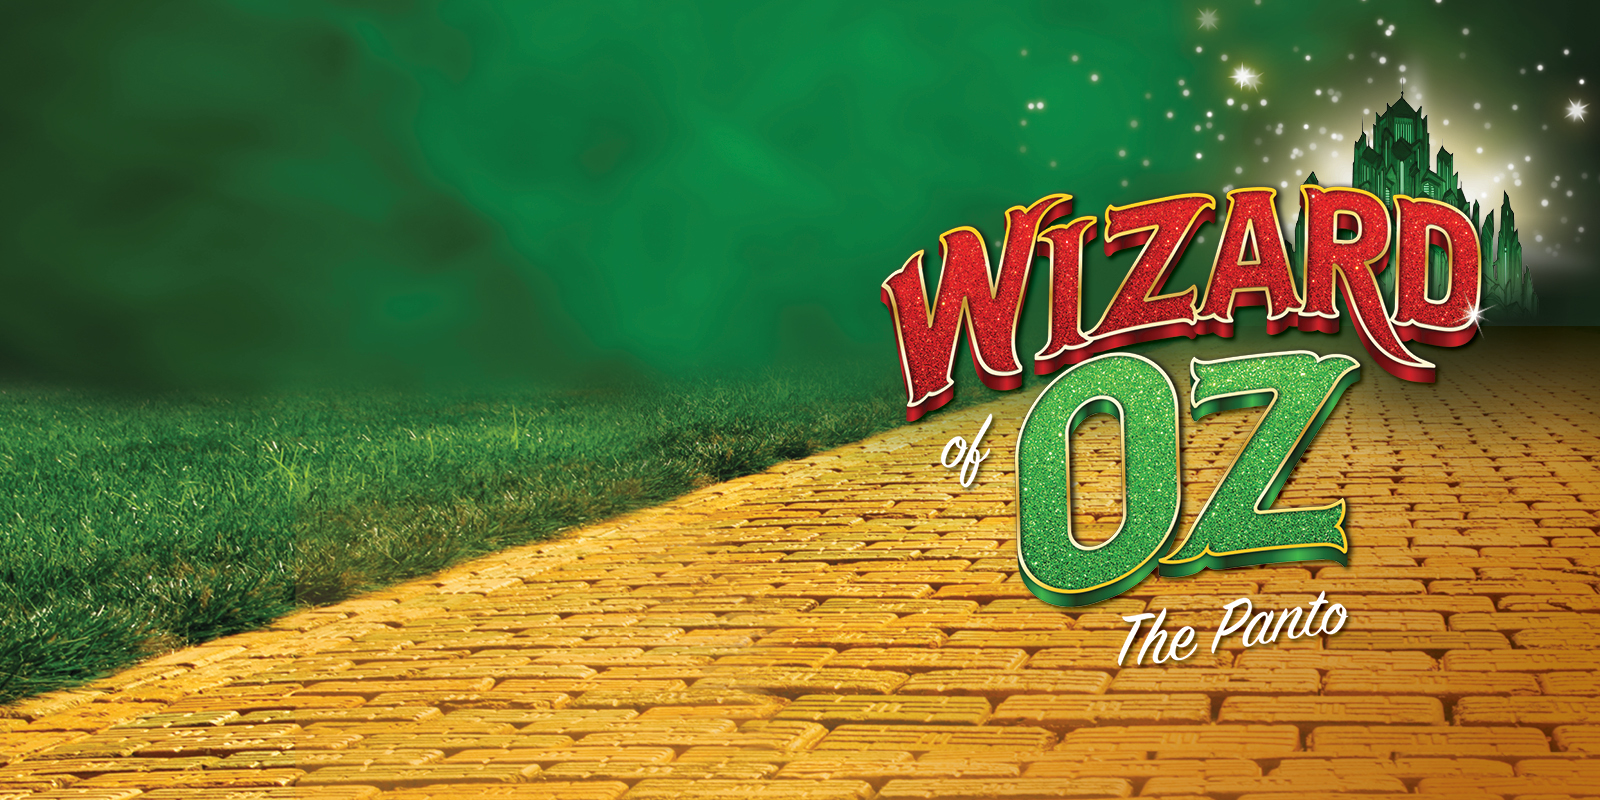 Wizard of Oz: The Panto auditions showing the yellow brick road and the Emerald City